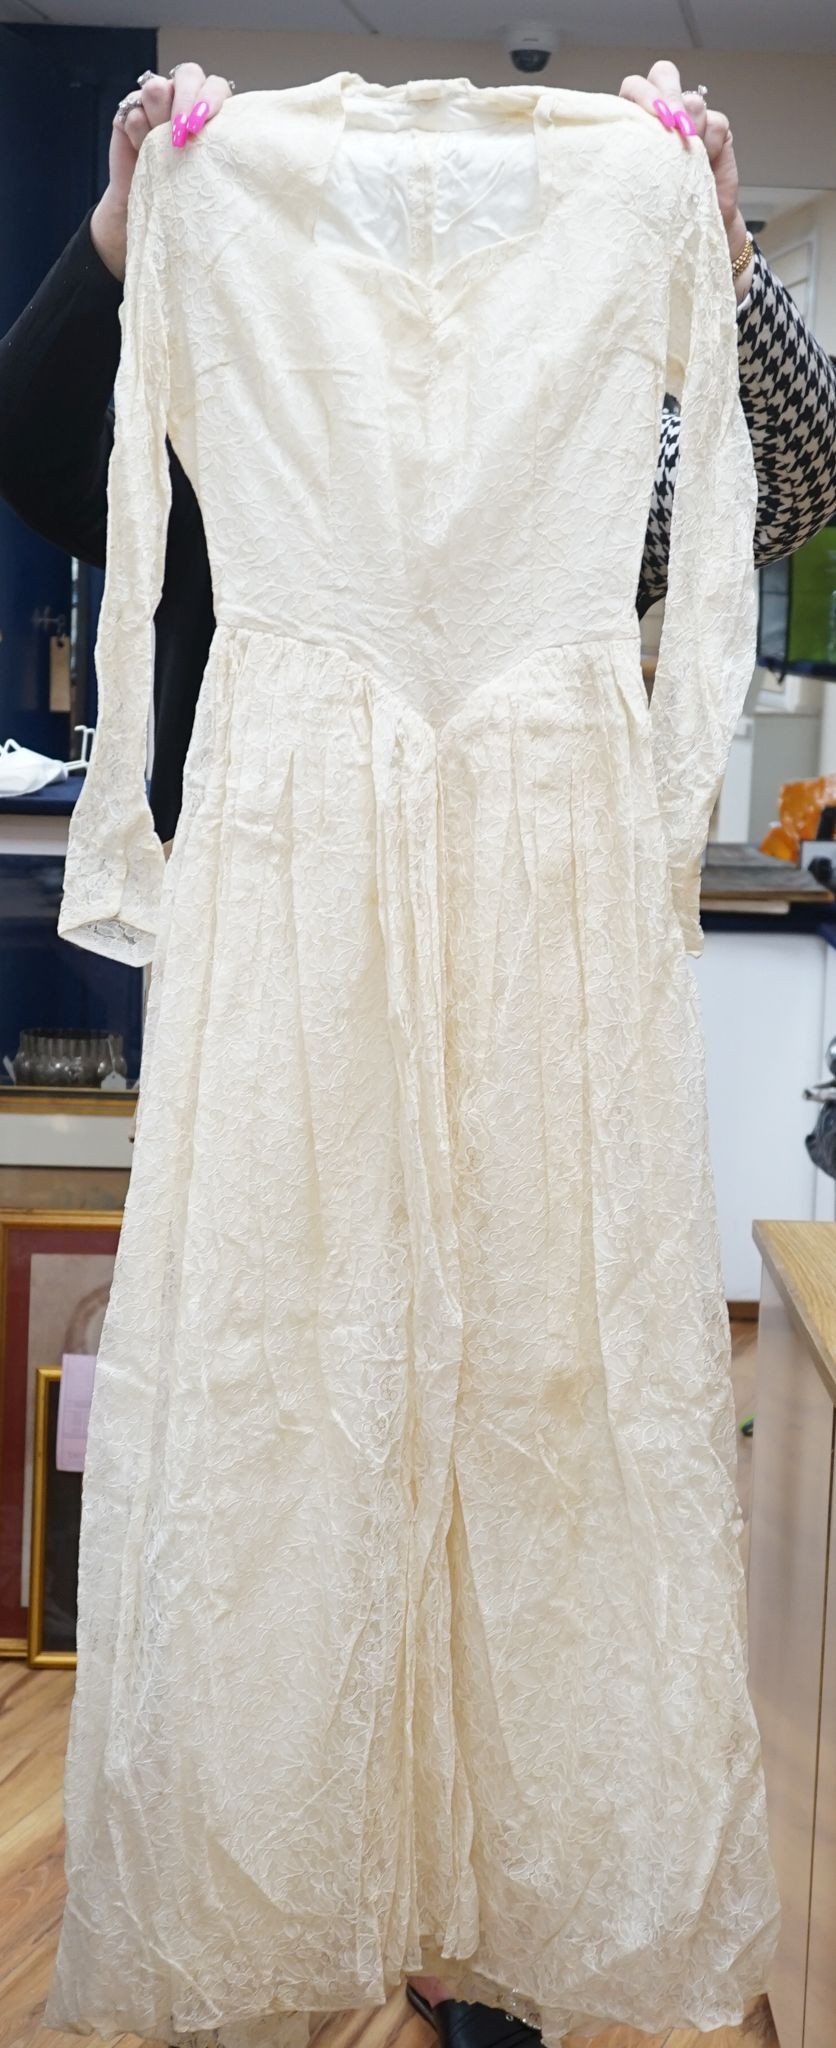 A late 1930's- 40's cream machine lace wedding dress and petticoat together with a pear listed floral tiara/ headdress.